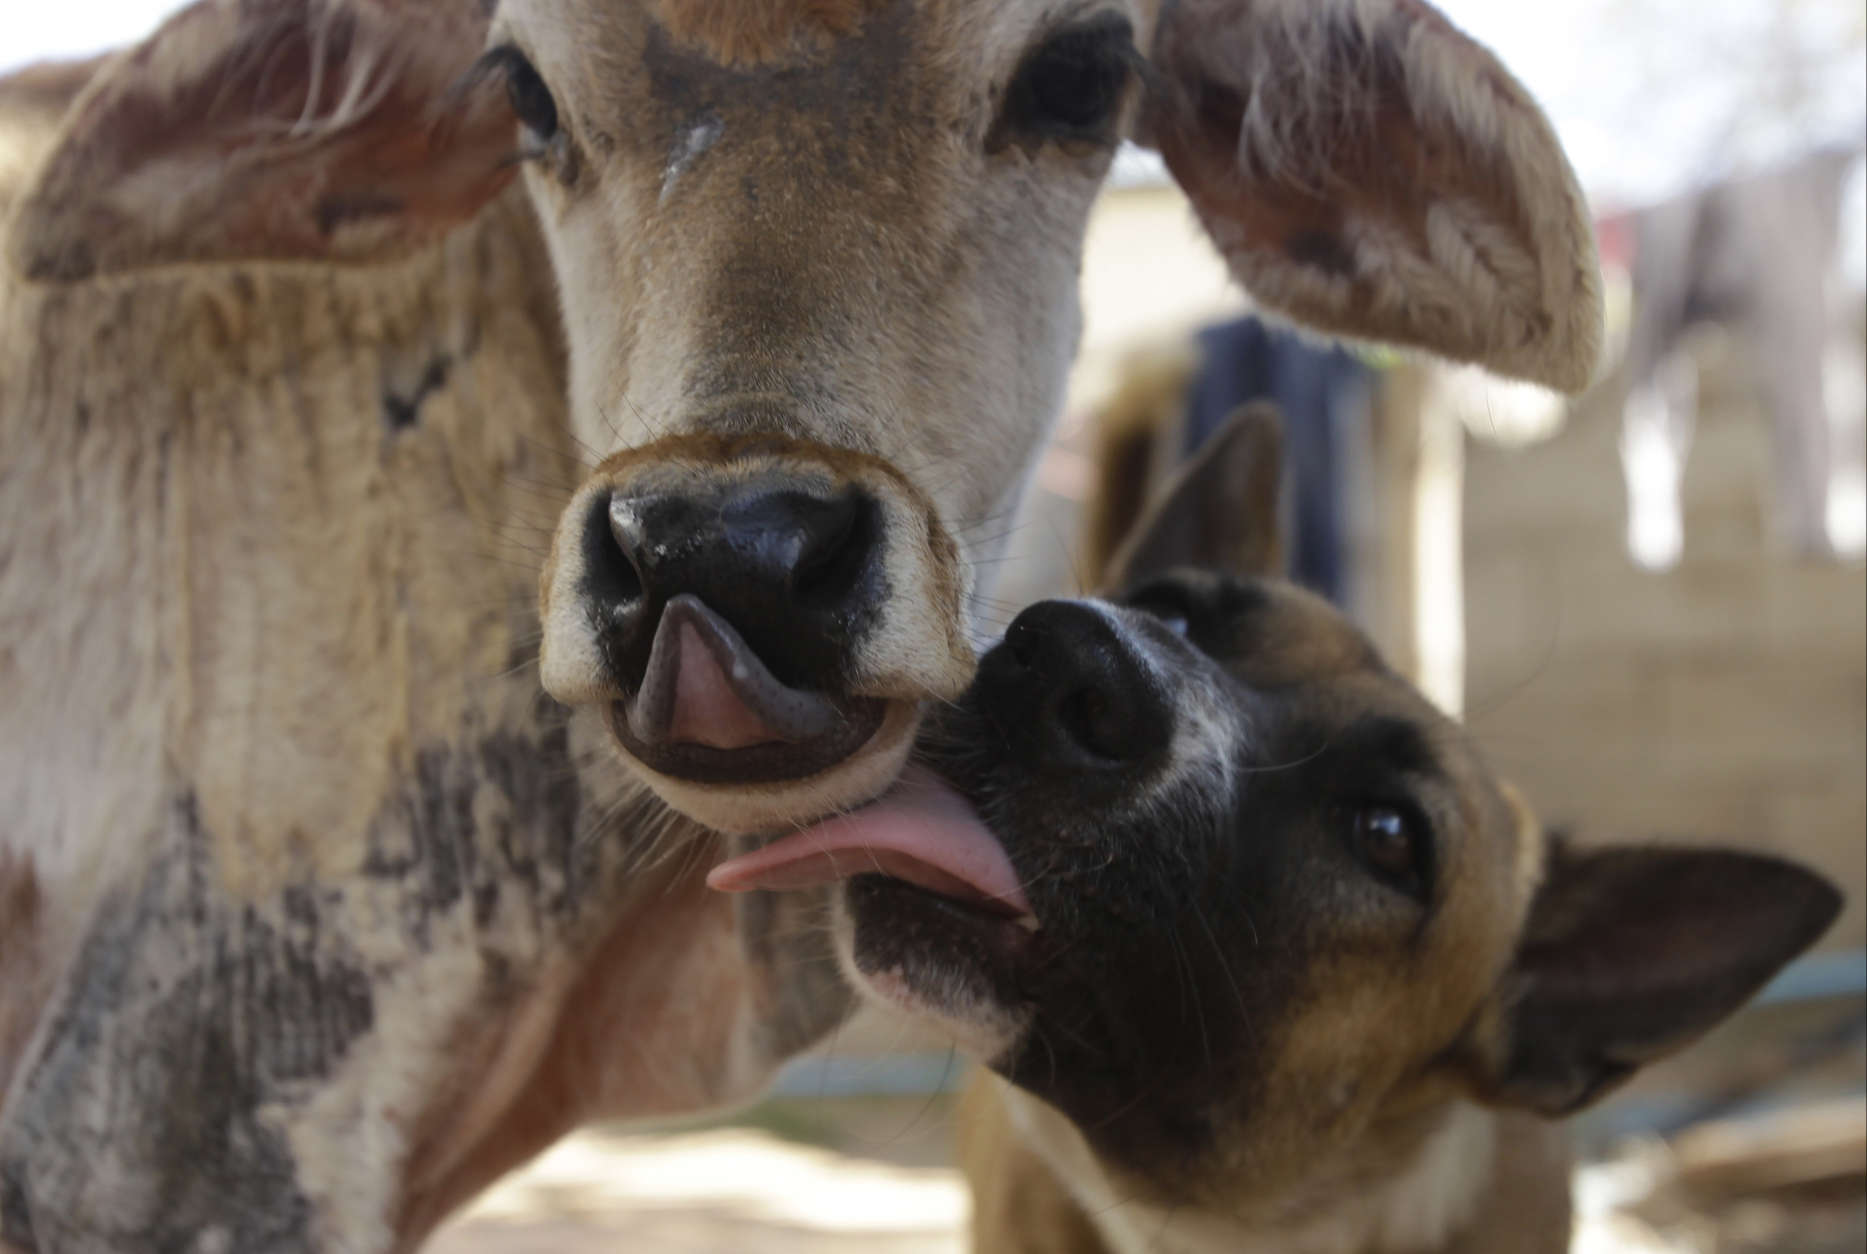 In this Saturday, Feb. 4, 2017 photo, a two-month-old male cow, left, is licked by a dog at the Chheu Buorn village, Kandal province, west of Phnom Penh, Cambodia. The cow started suckling the dog after it was born to a sick mother. (AP Photo/Heng Sinith, File)